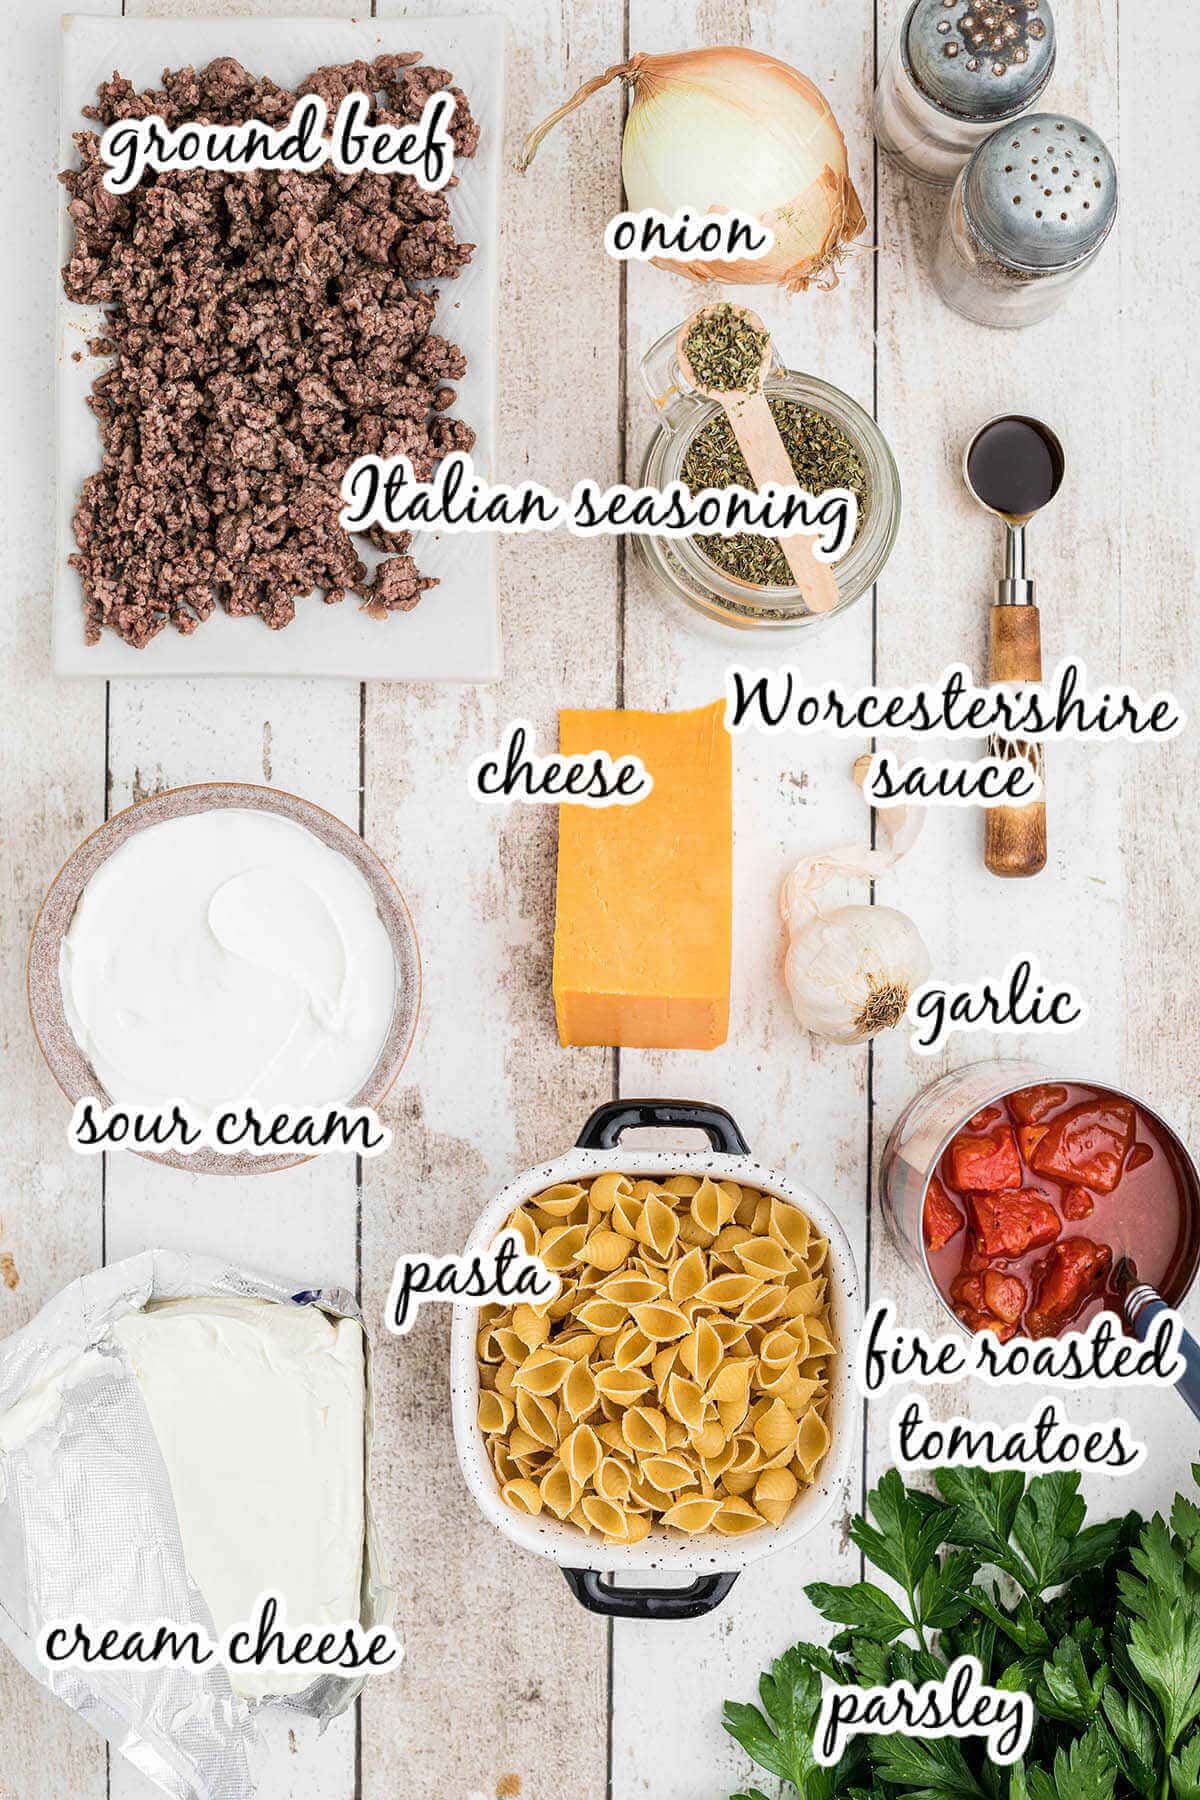 Ingredients for casserole recipe, with print overlay.